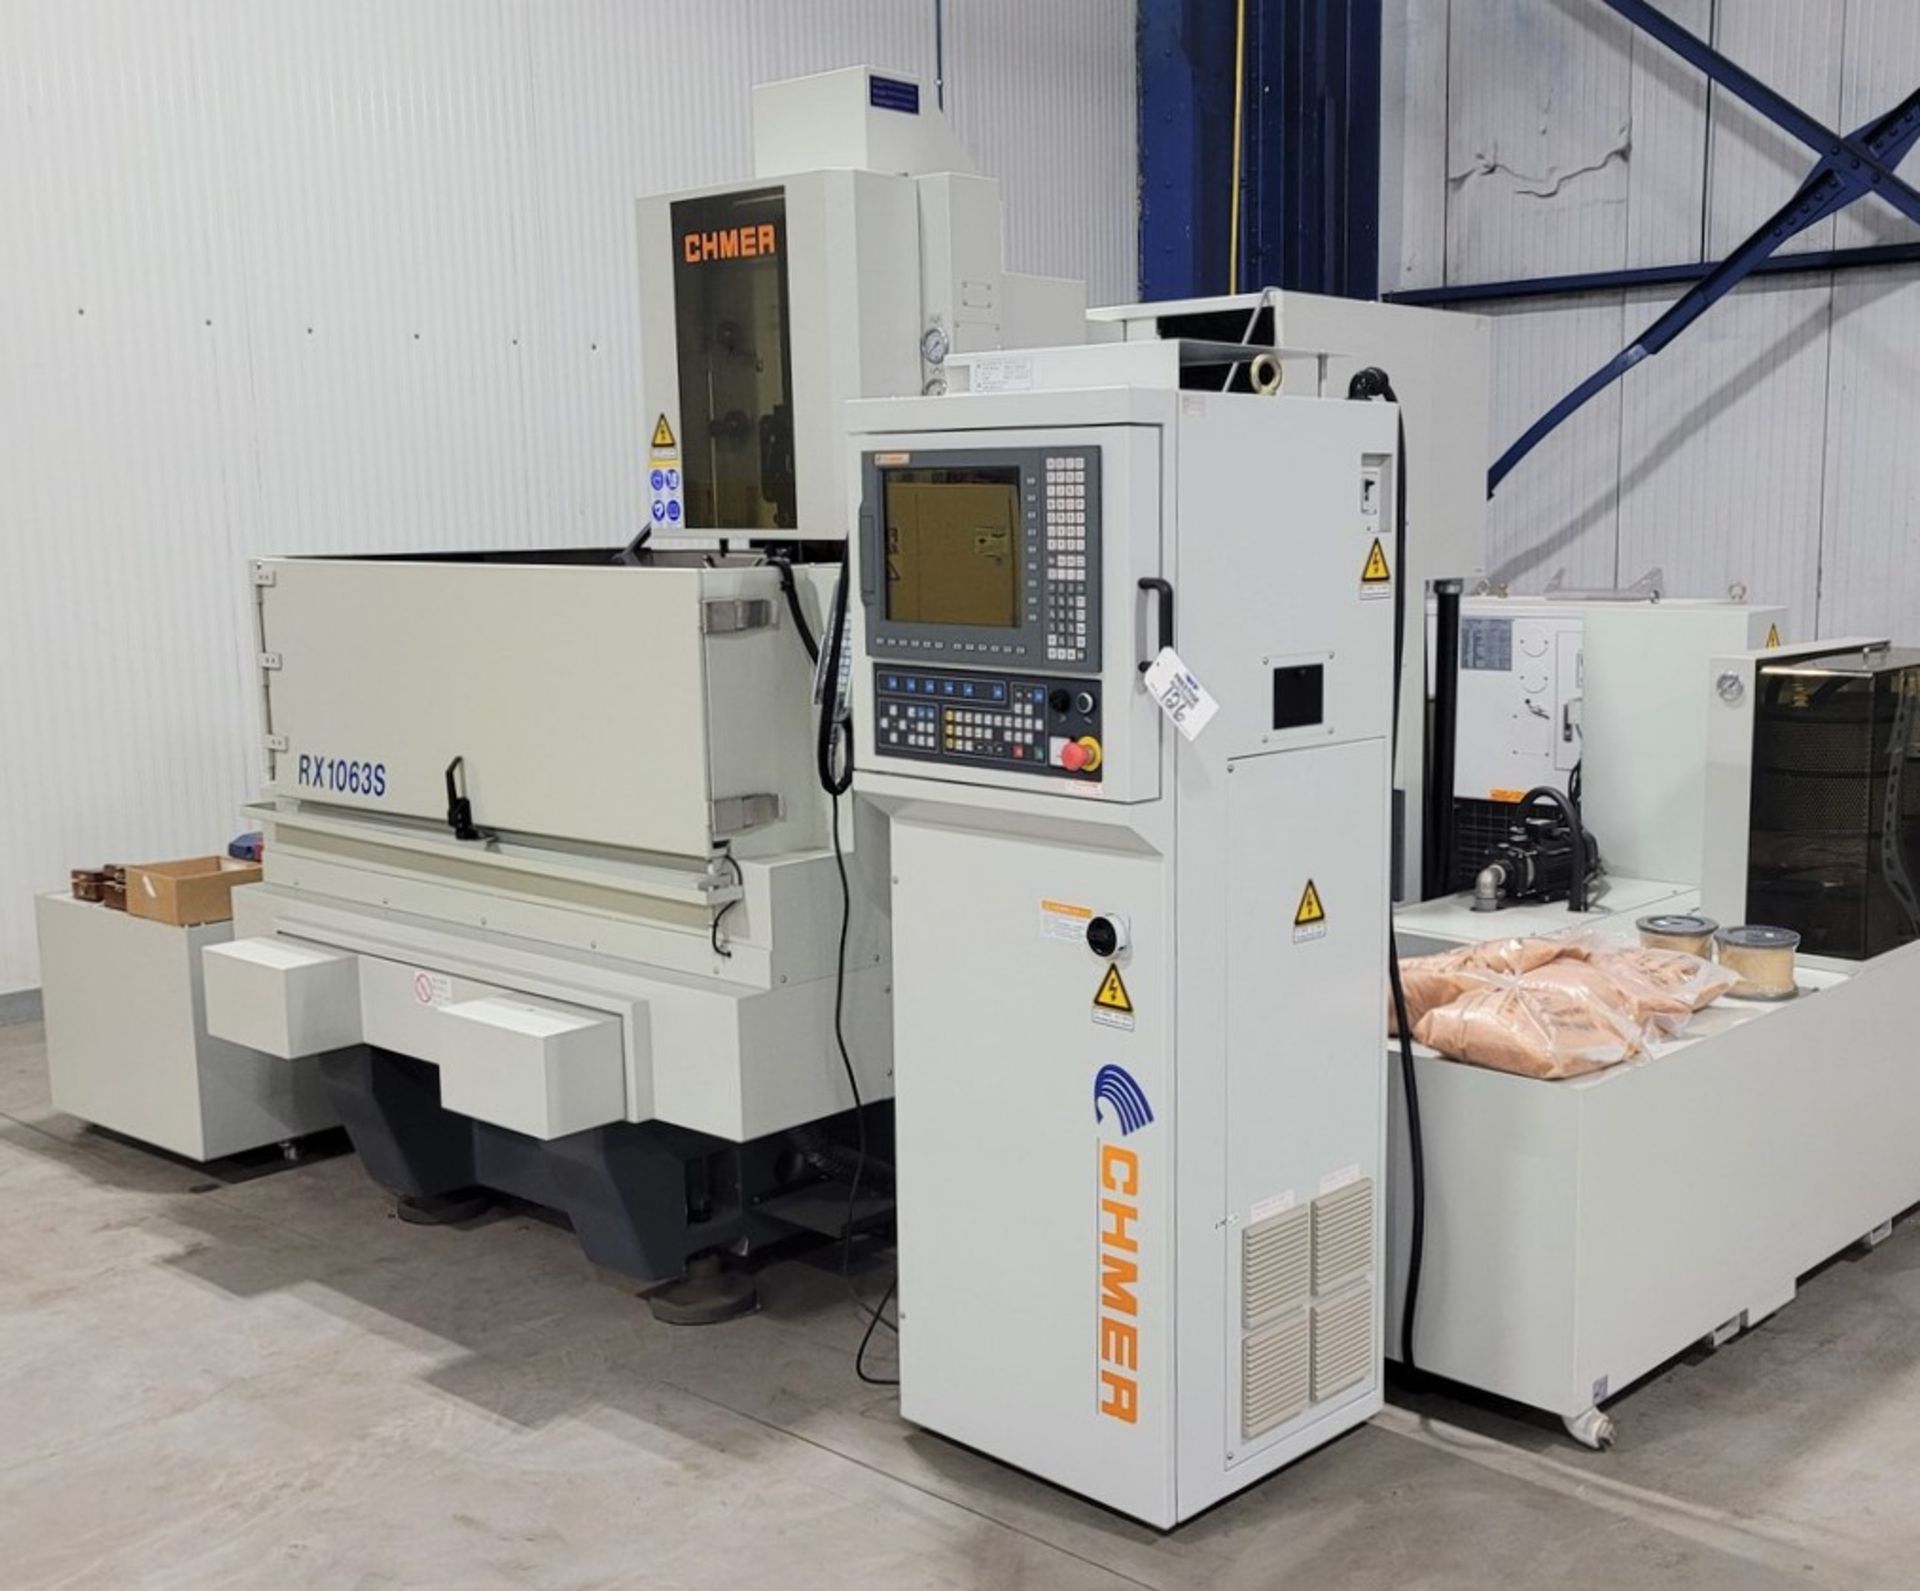 Chmer RX-1063S CNC Wire Cut EDM - Image 2 of 20